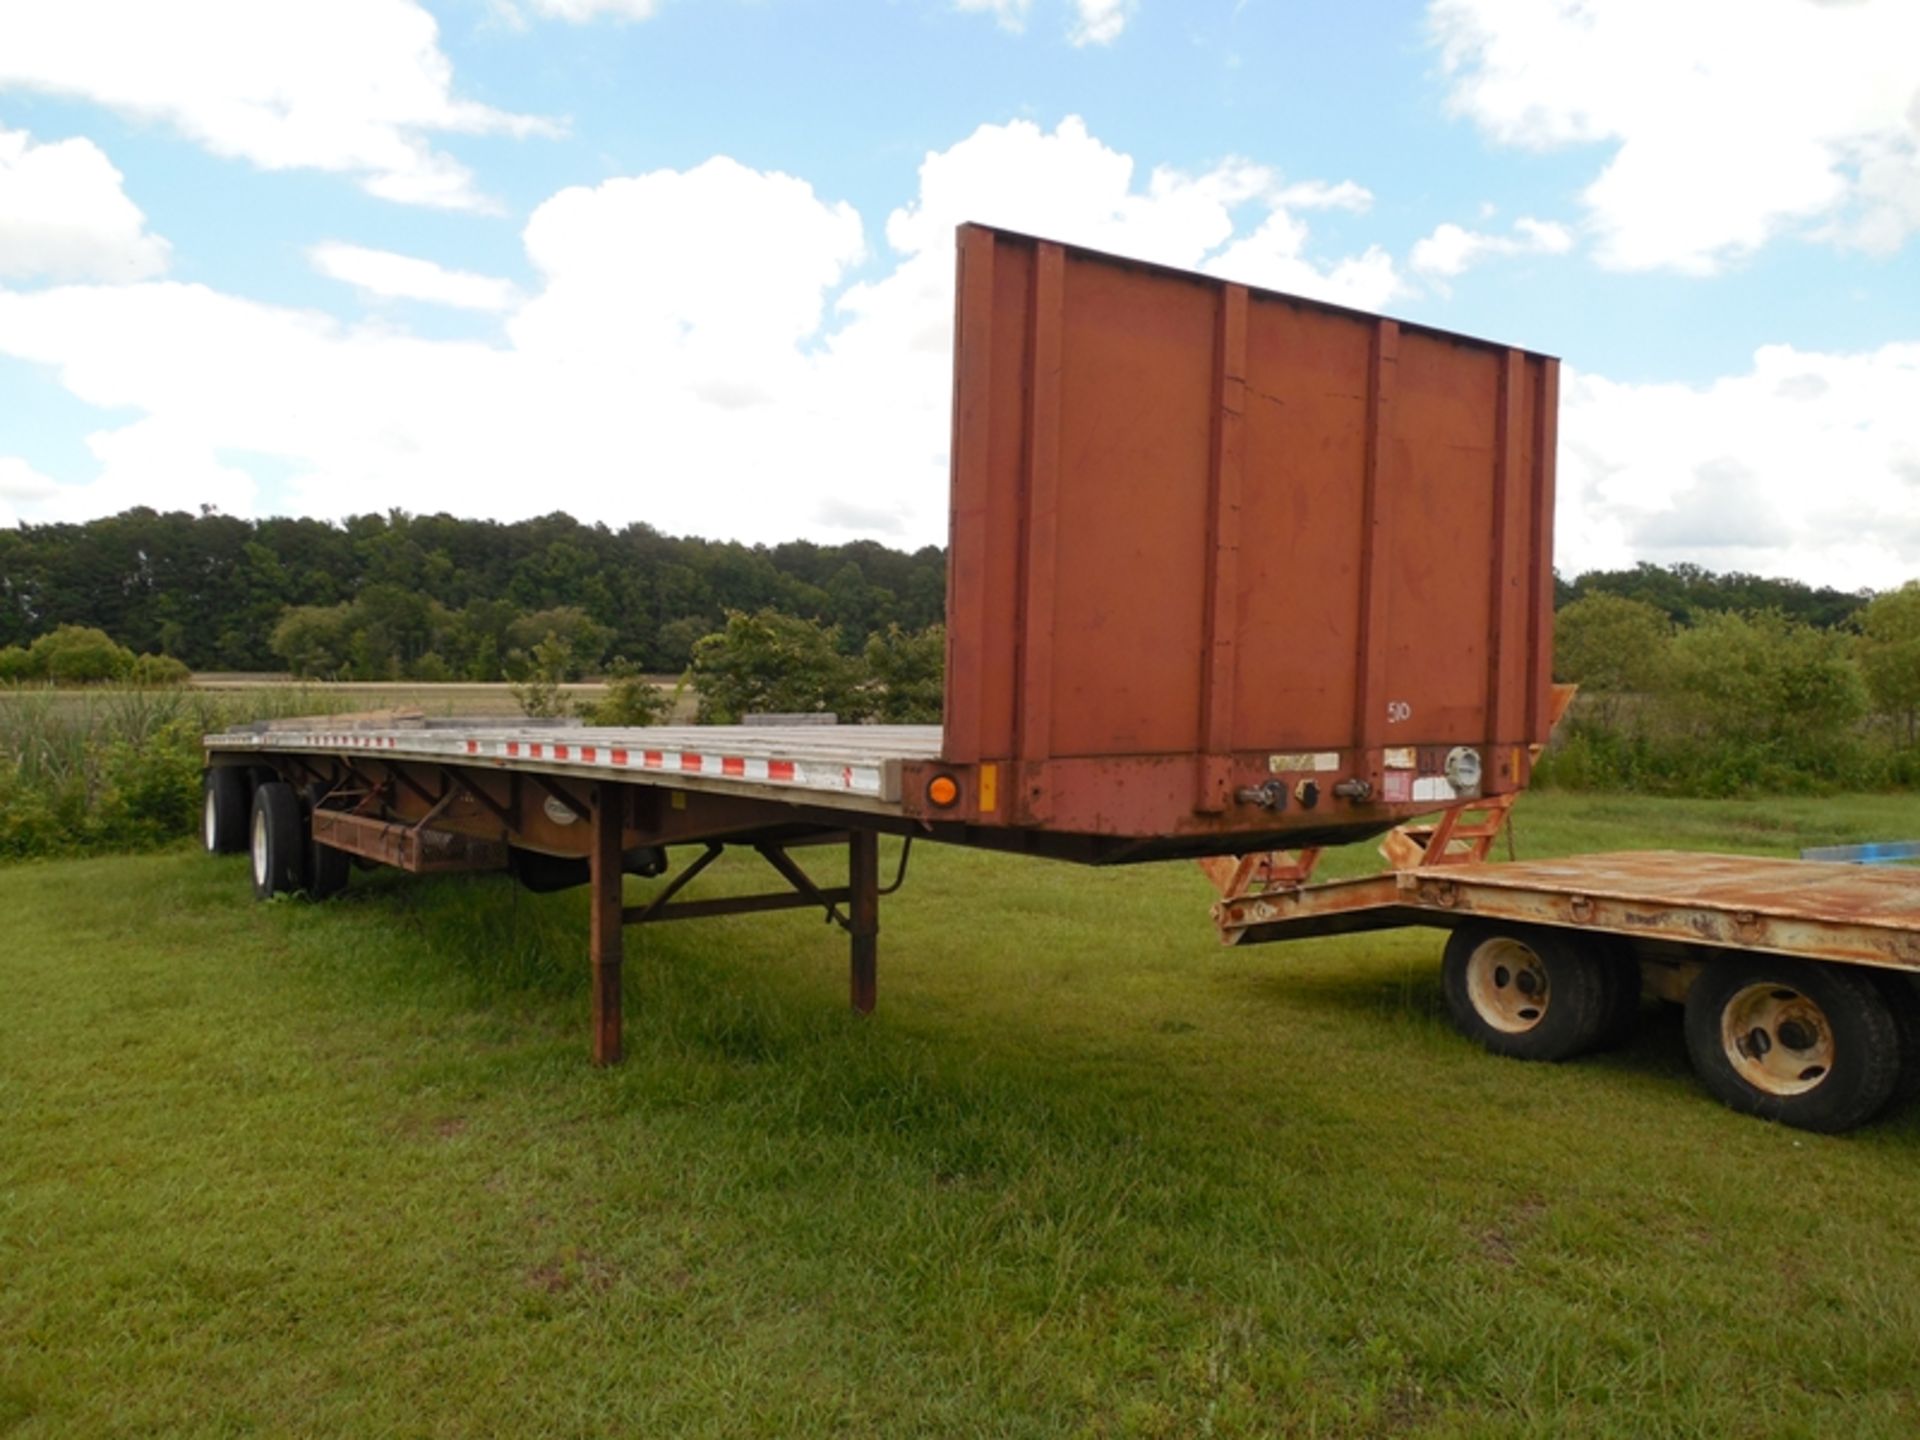 1999 Fontaine Trailer 96' x 45' aluminum over steel spread axlevin# 13N45306X1583983 - Image 2 of 4